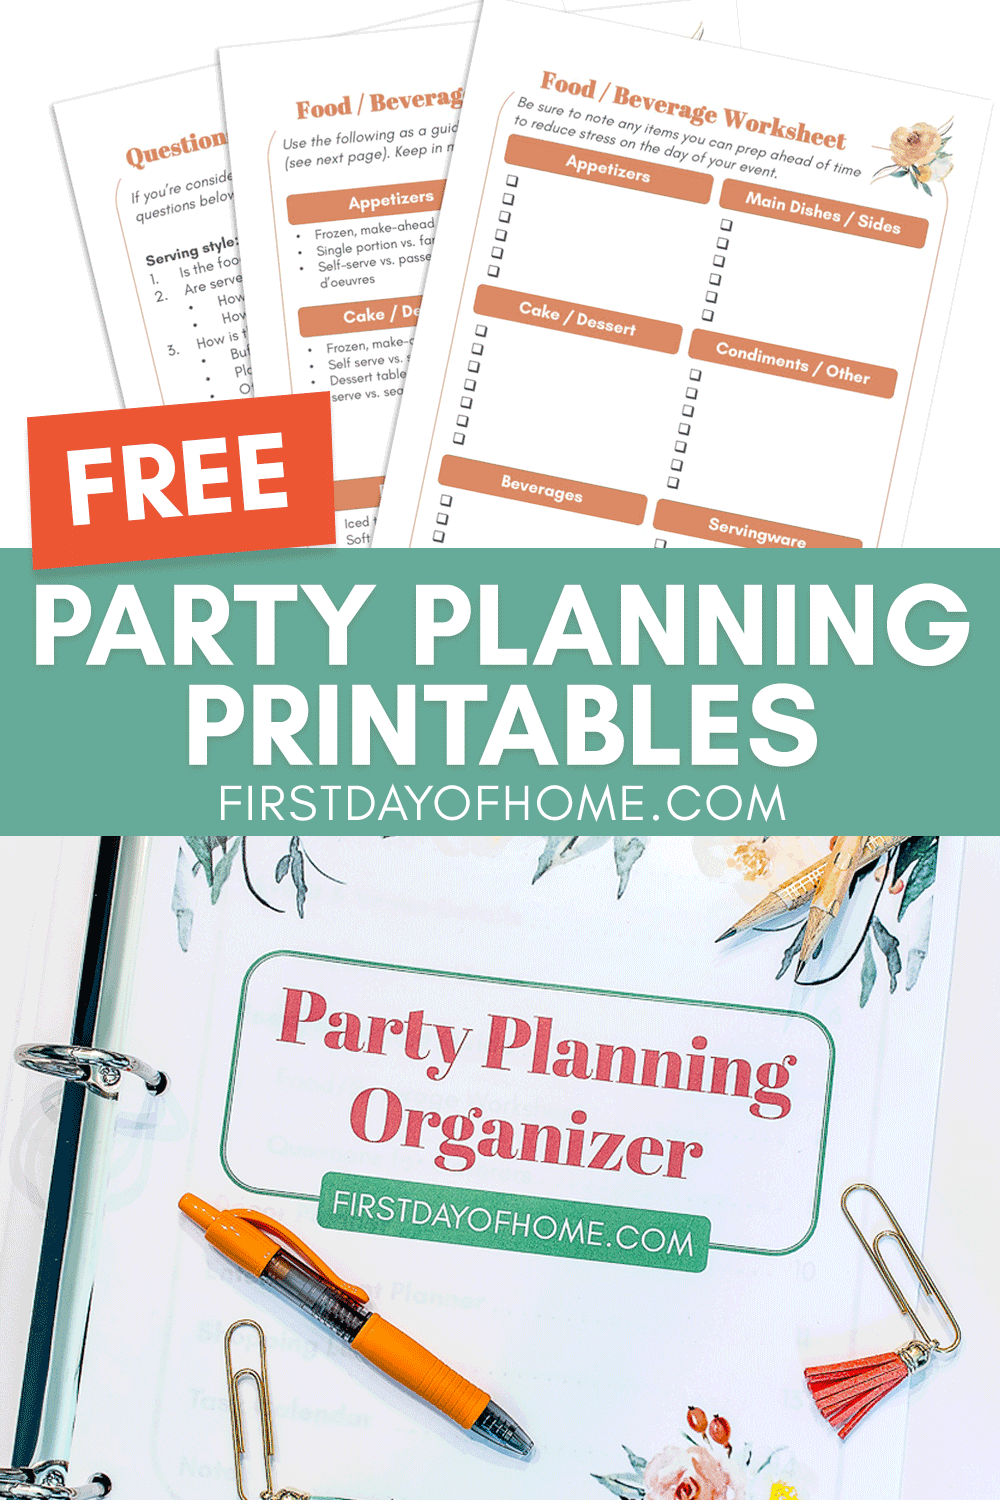 Party planning printables organizer for special events